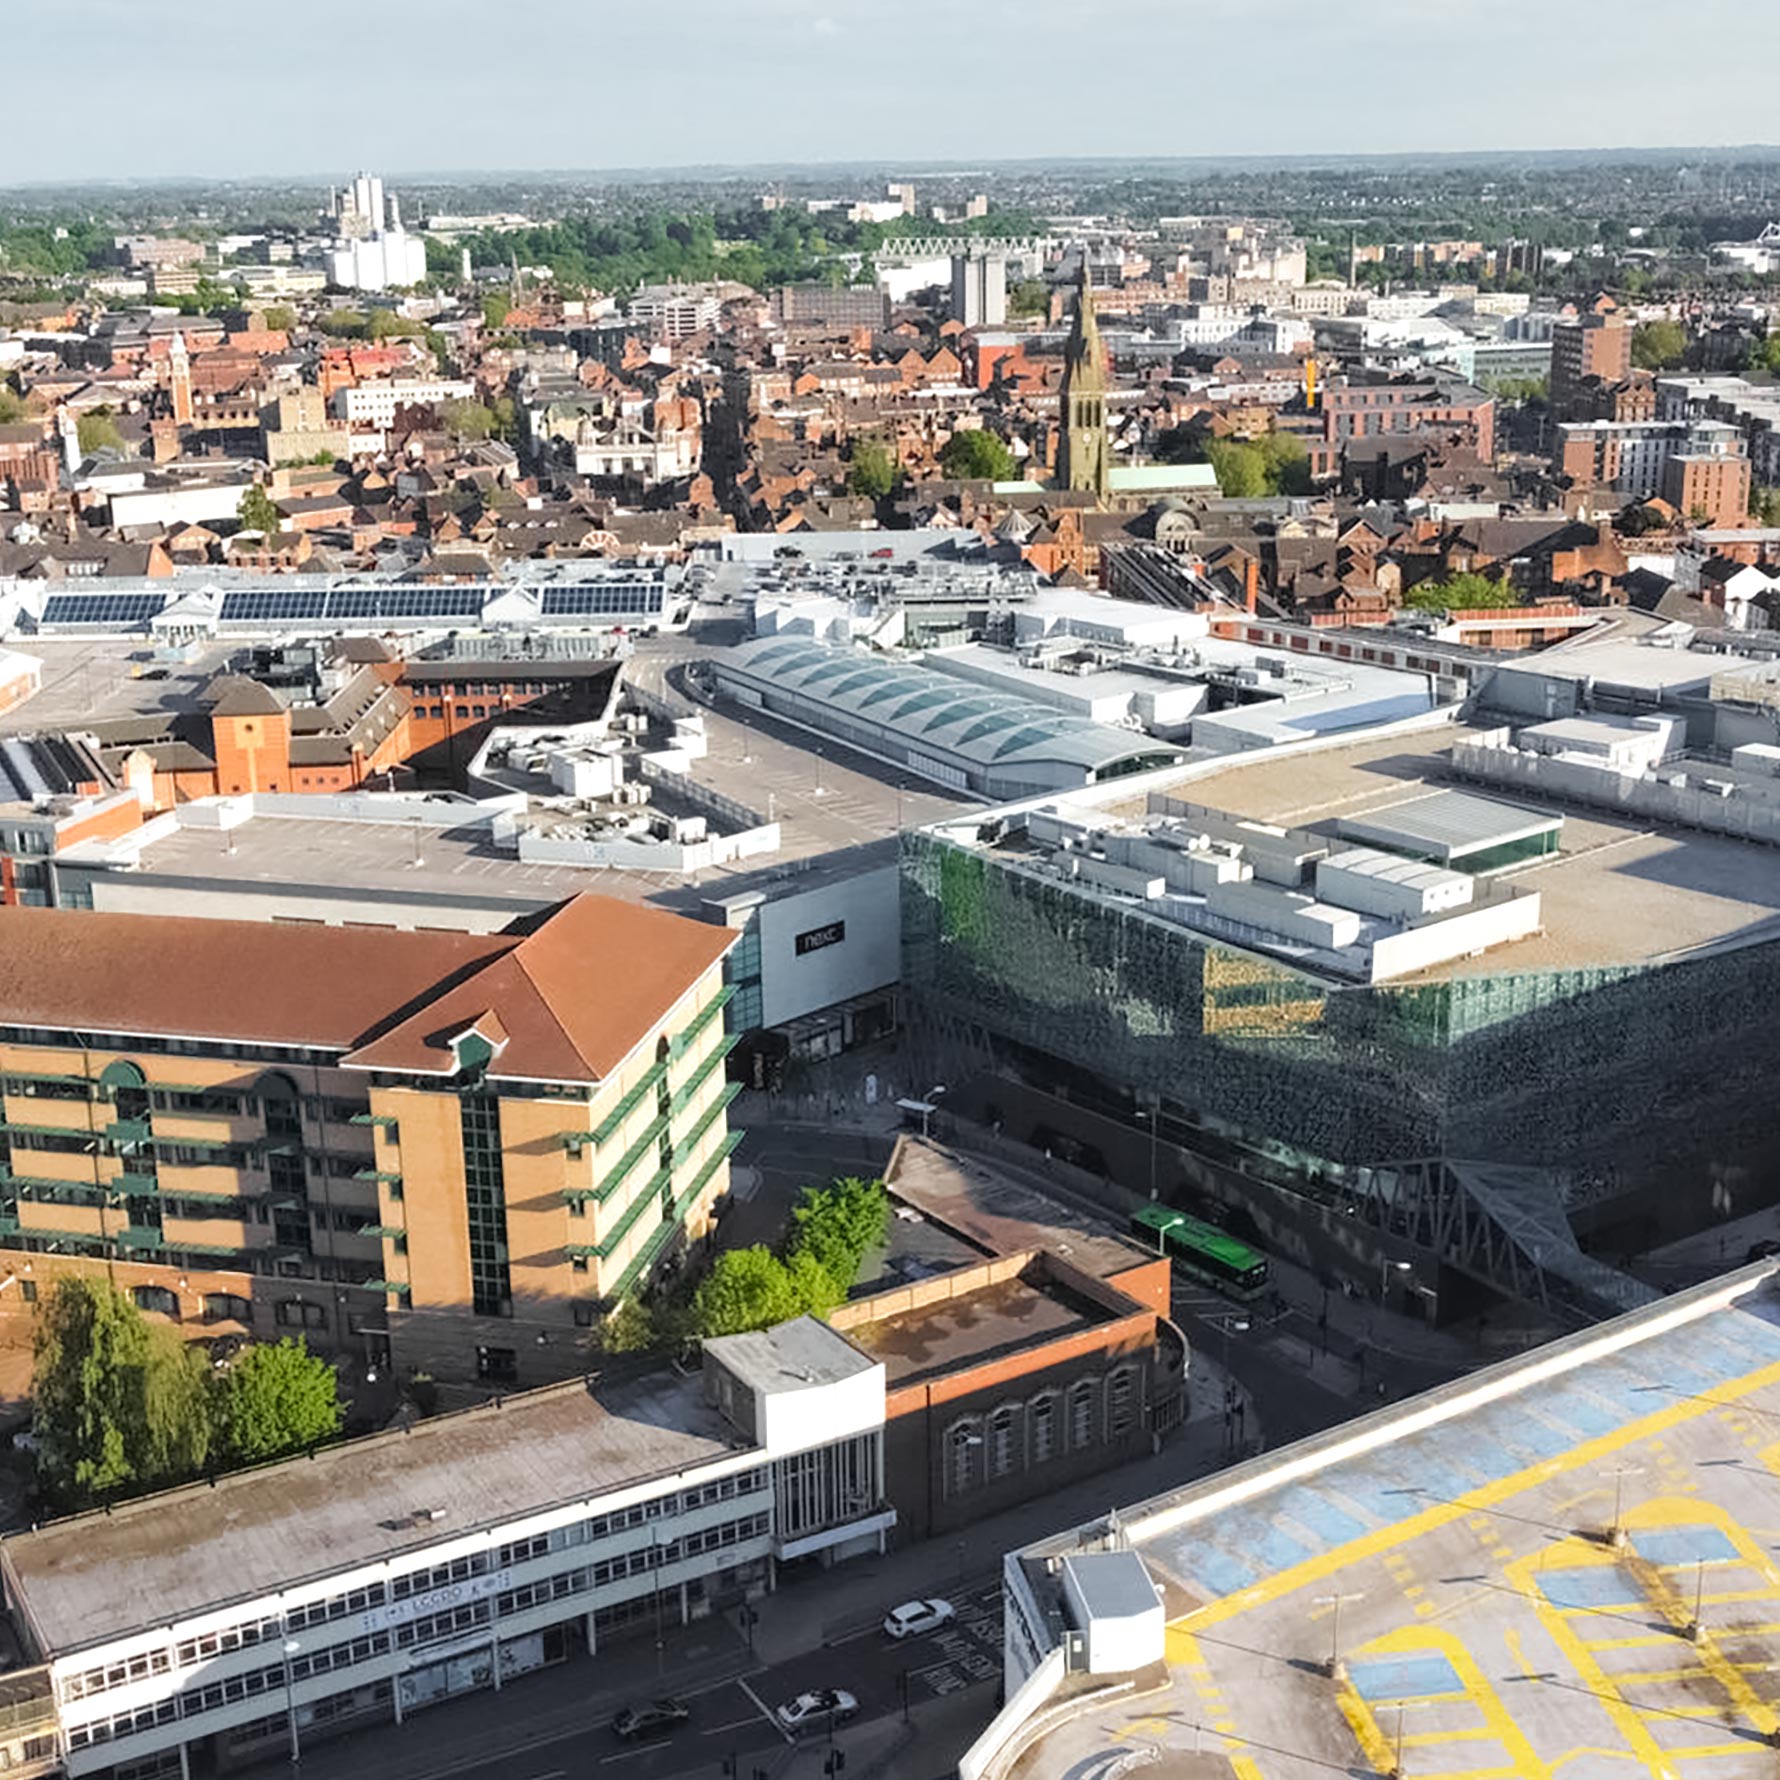 Large full width photo of Leicester City from a bird's-eye panormaic view, shows buildings in the city from a top perspective